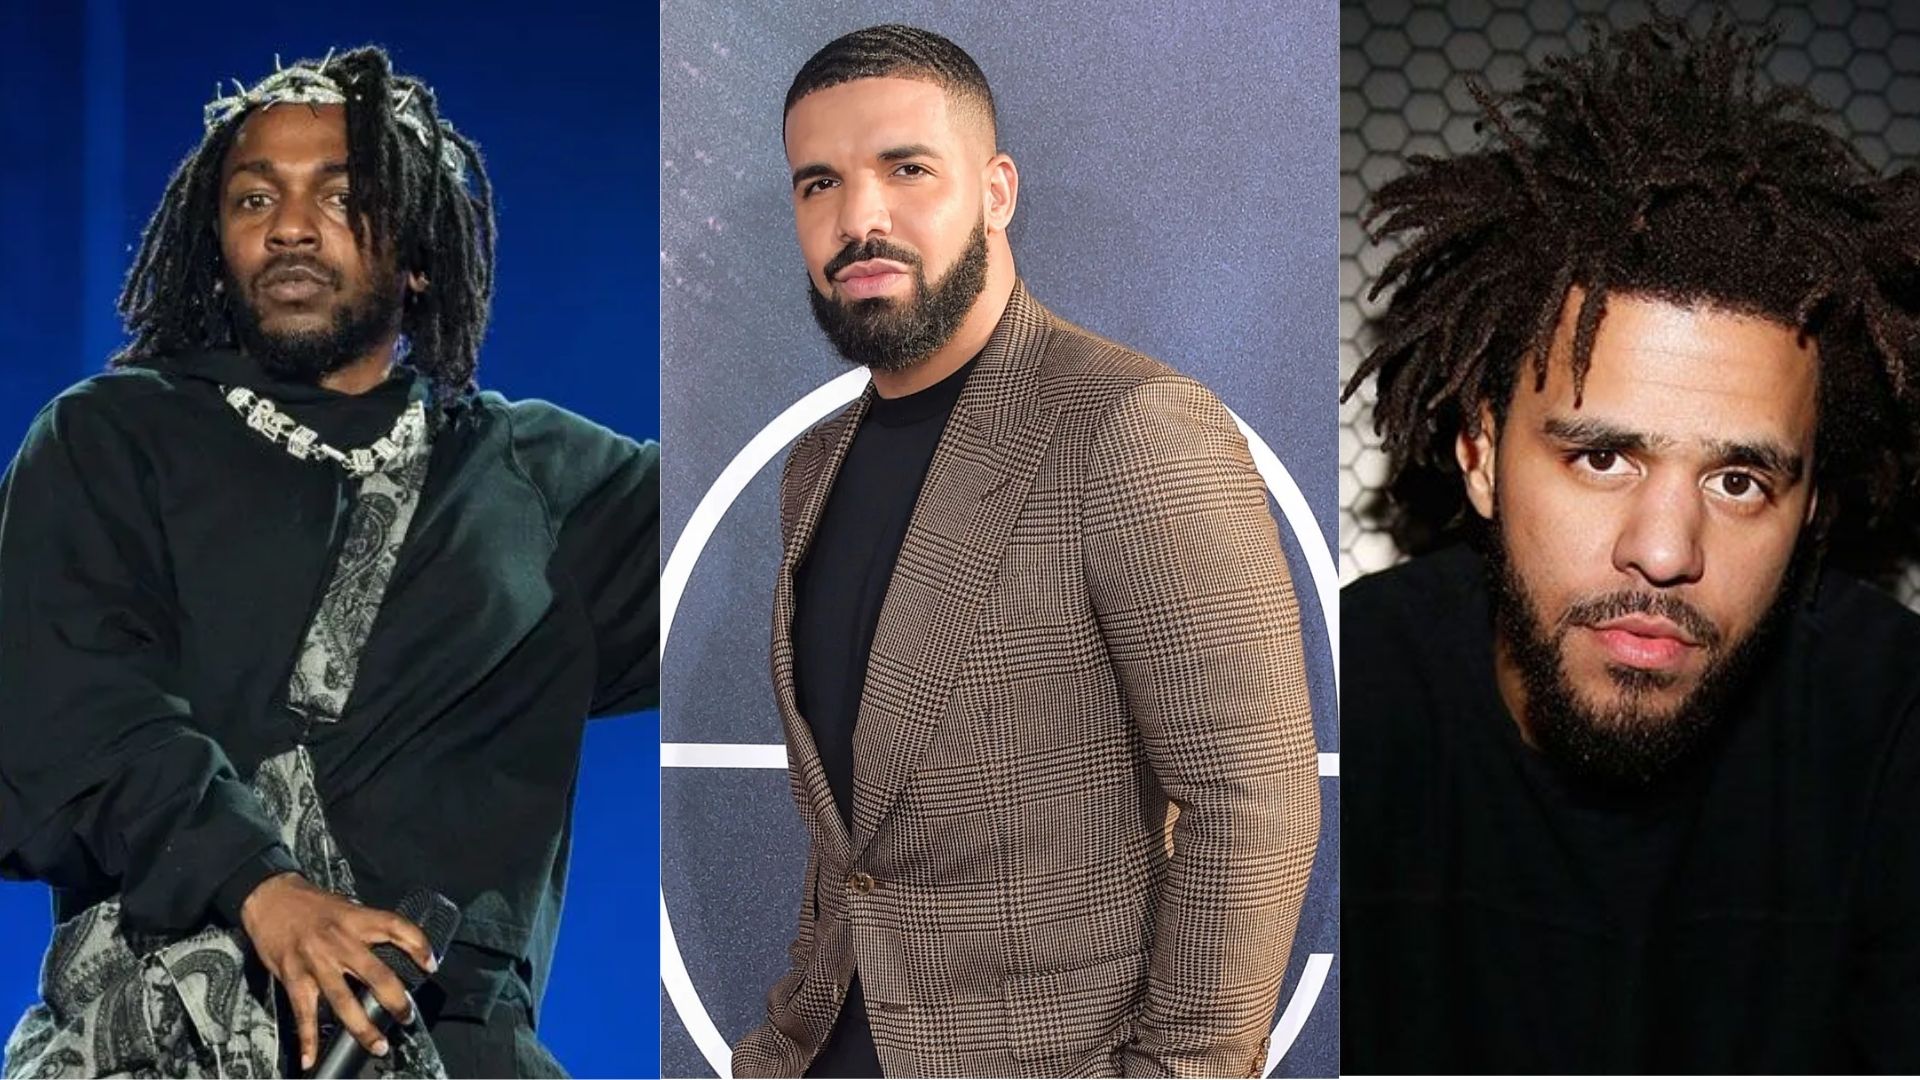 Kendrick Lamar, Drake, and J Cole Hip-Hop Feud: What You Need to Know